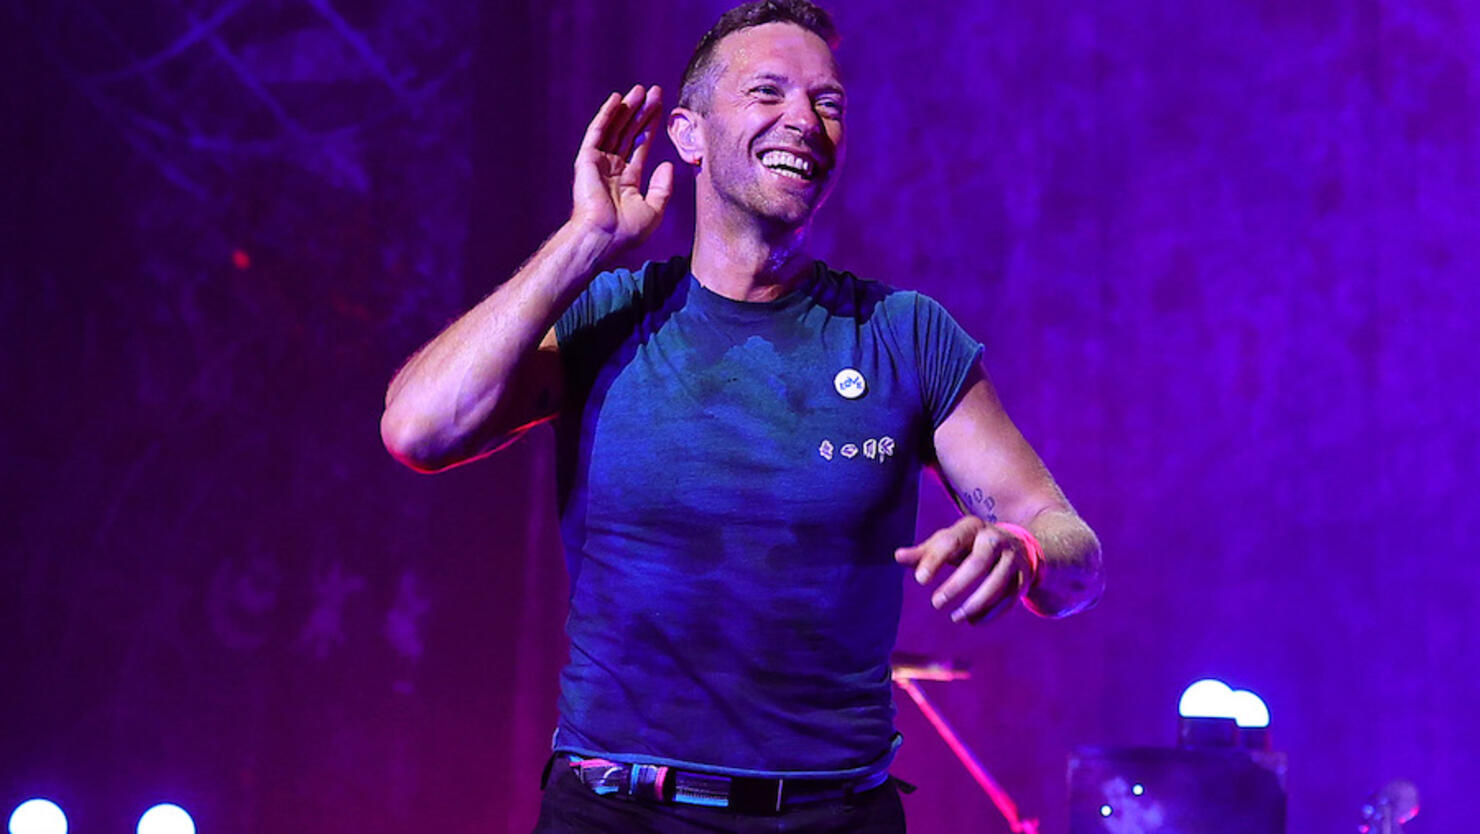 Coldplay Performs Live At The Apollo Theater For SiriusXM And Pandora's Small Stage Series In Harlem, NY